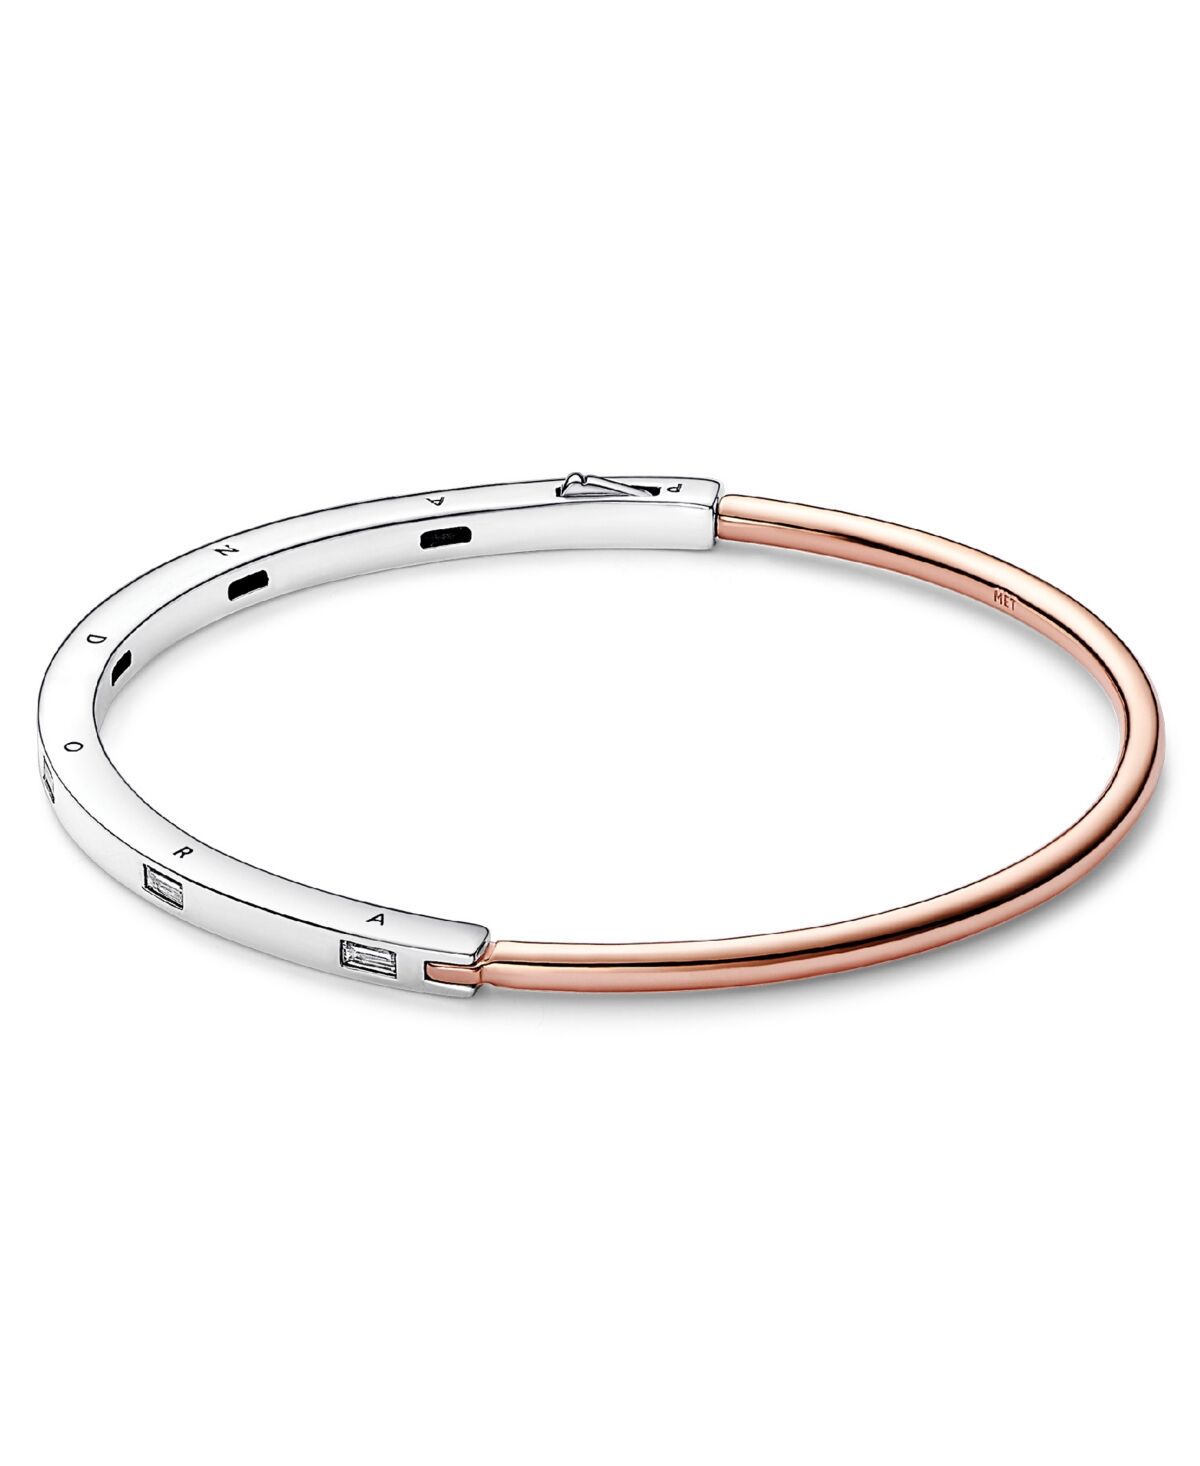 Pandora Signature 14K Rose Gold-Plated and Sterling Silver Two-Tone I-d Pave Bangle Bracelet - Mixed